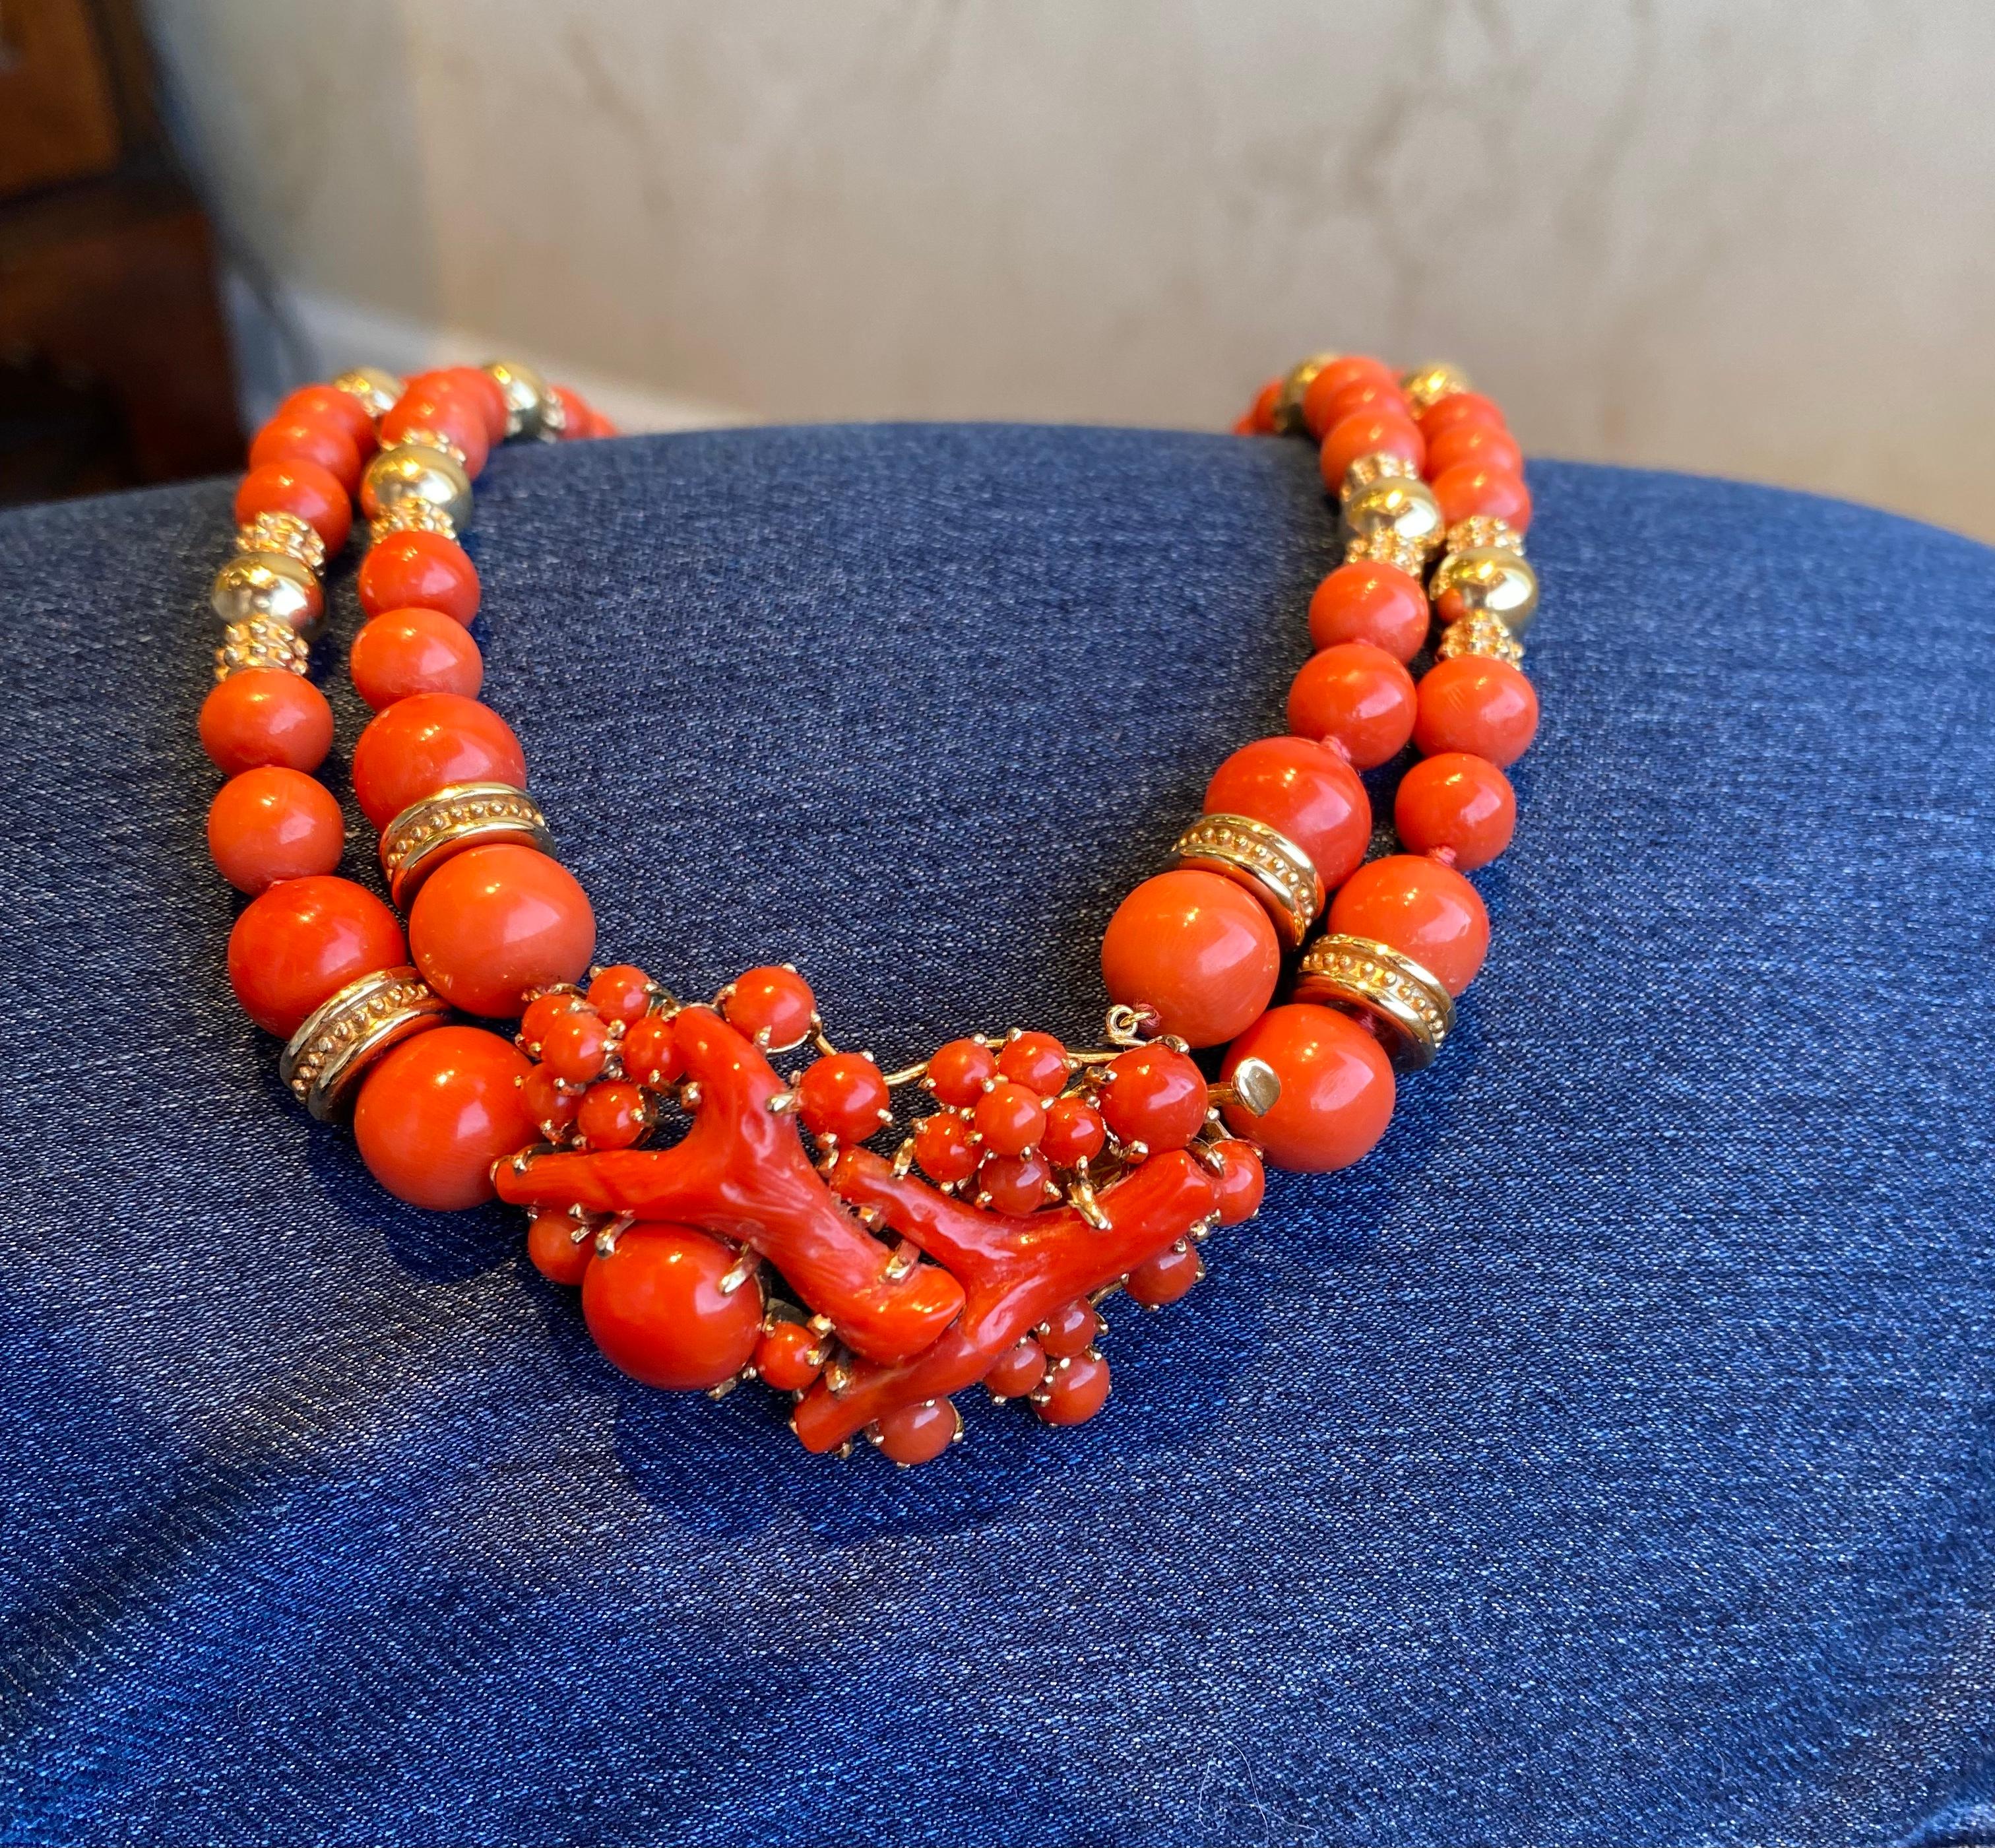 
LAST PRICE REDUCTION! Get this before its GONE!
This beautiful vintage double strand, Red Italian Coral bead neckalce once belonged to Alfred W. Miles estate of New York.  In the 1950's Mr. Miles was well known CPA , and was the director of the